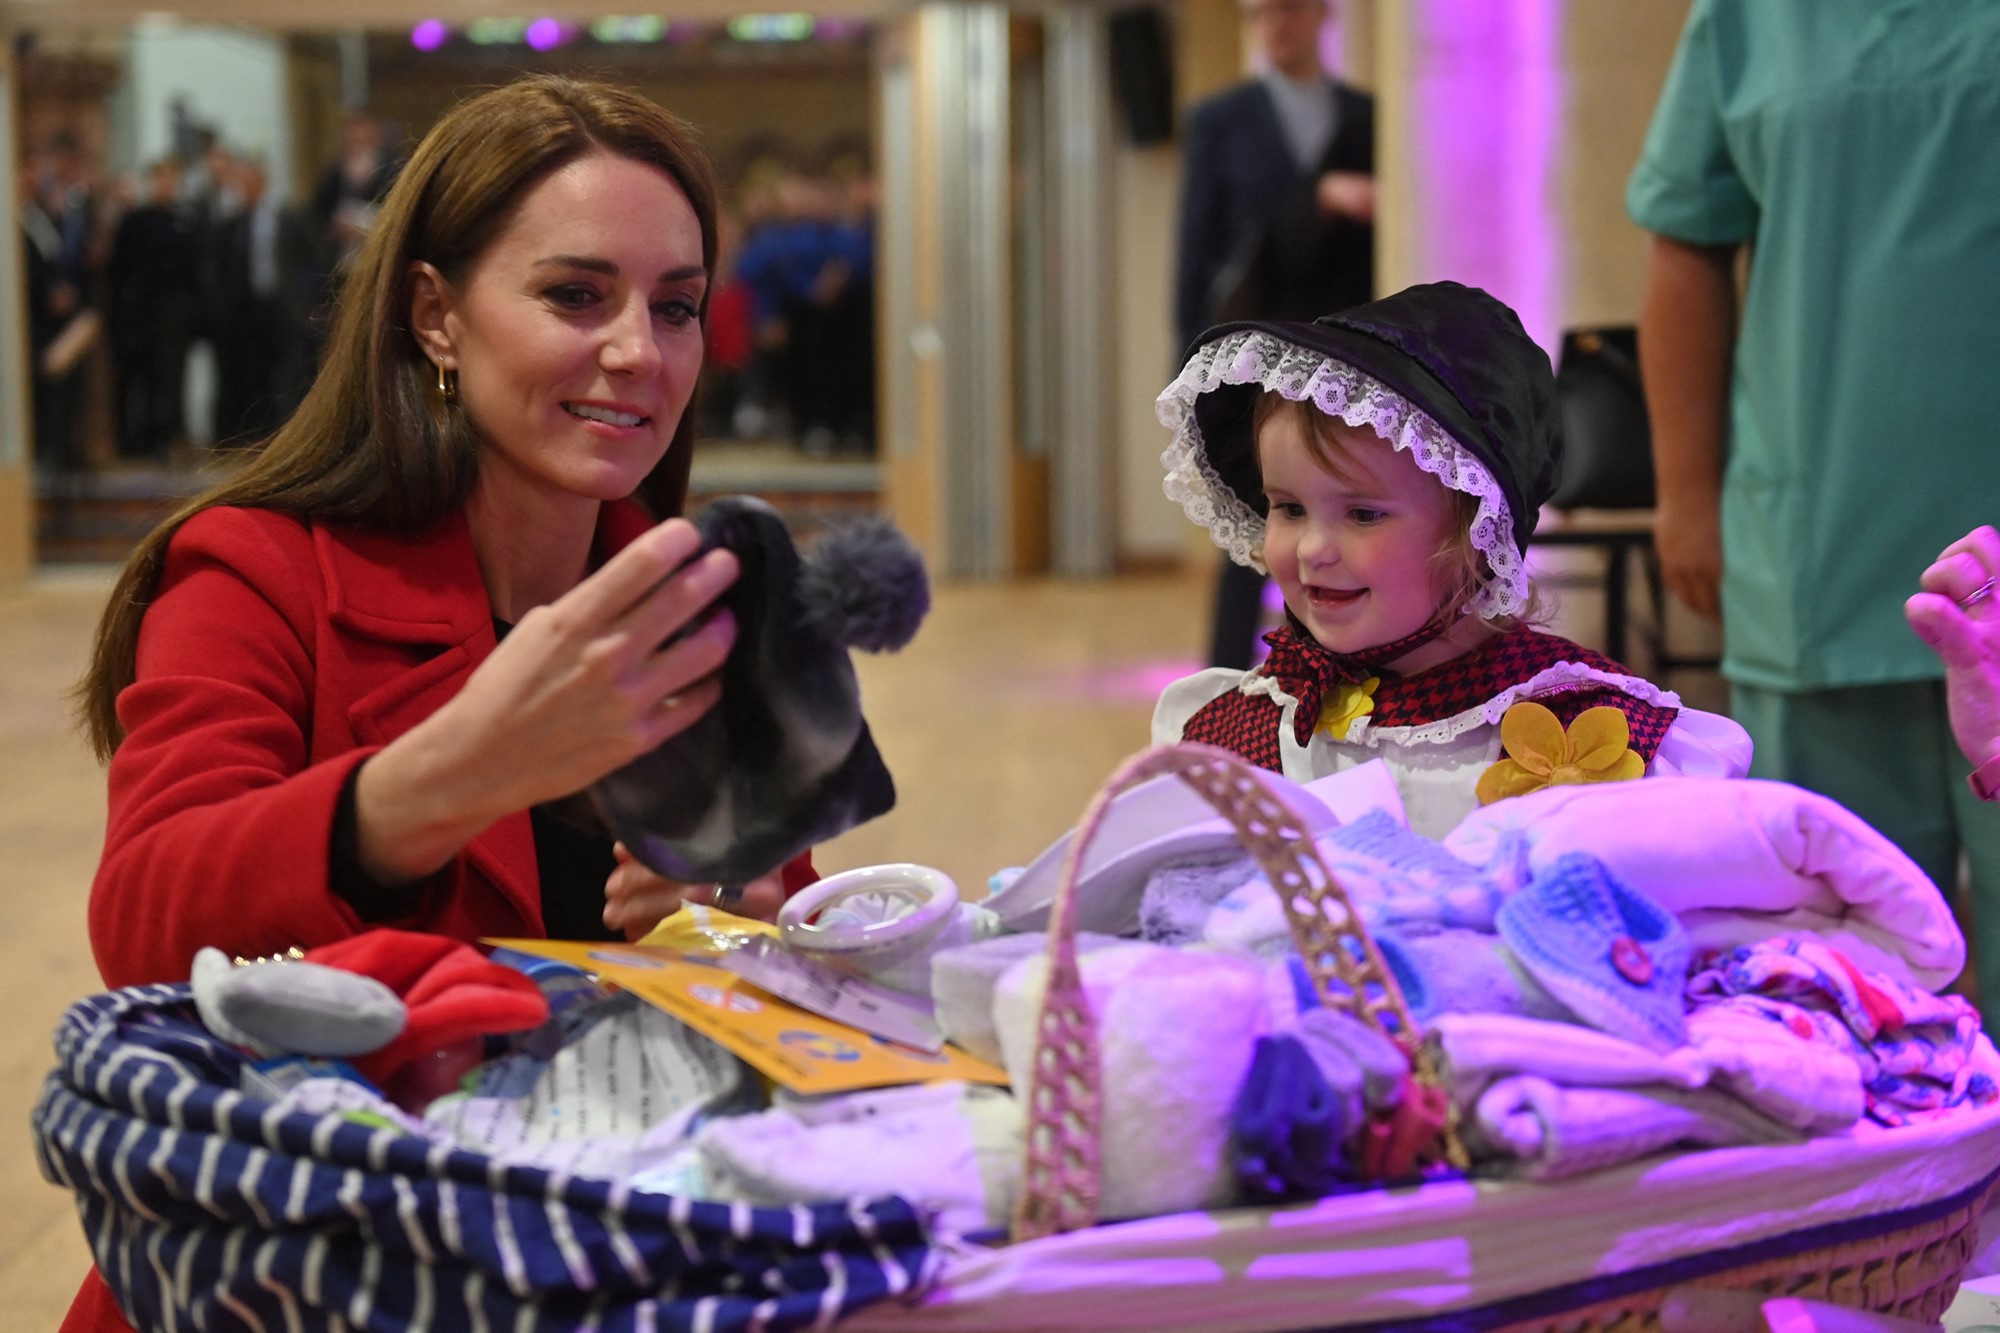 Princess Catherine looks at a hat next to a young girl